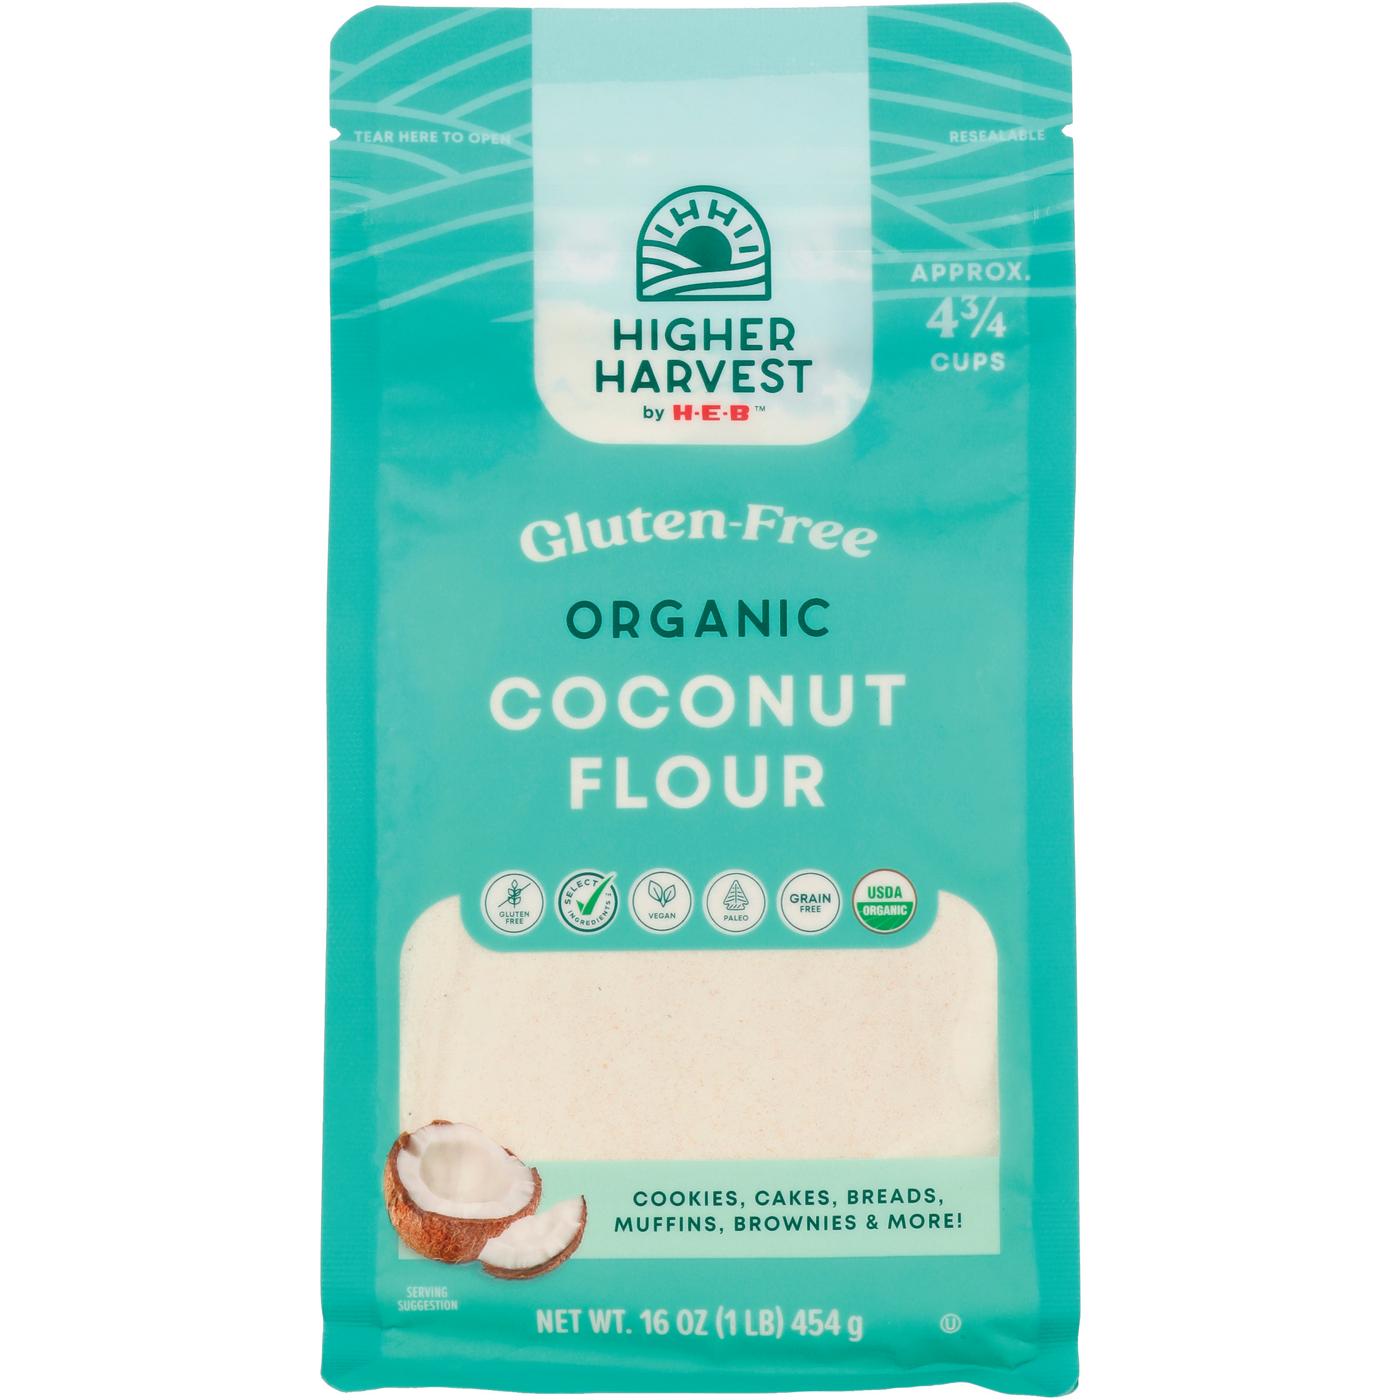 Higher Harvest by H-E-B Gluten-Free Organic Coconut Flour; image 1 of 3